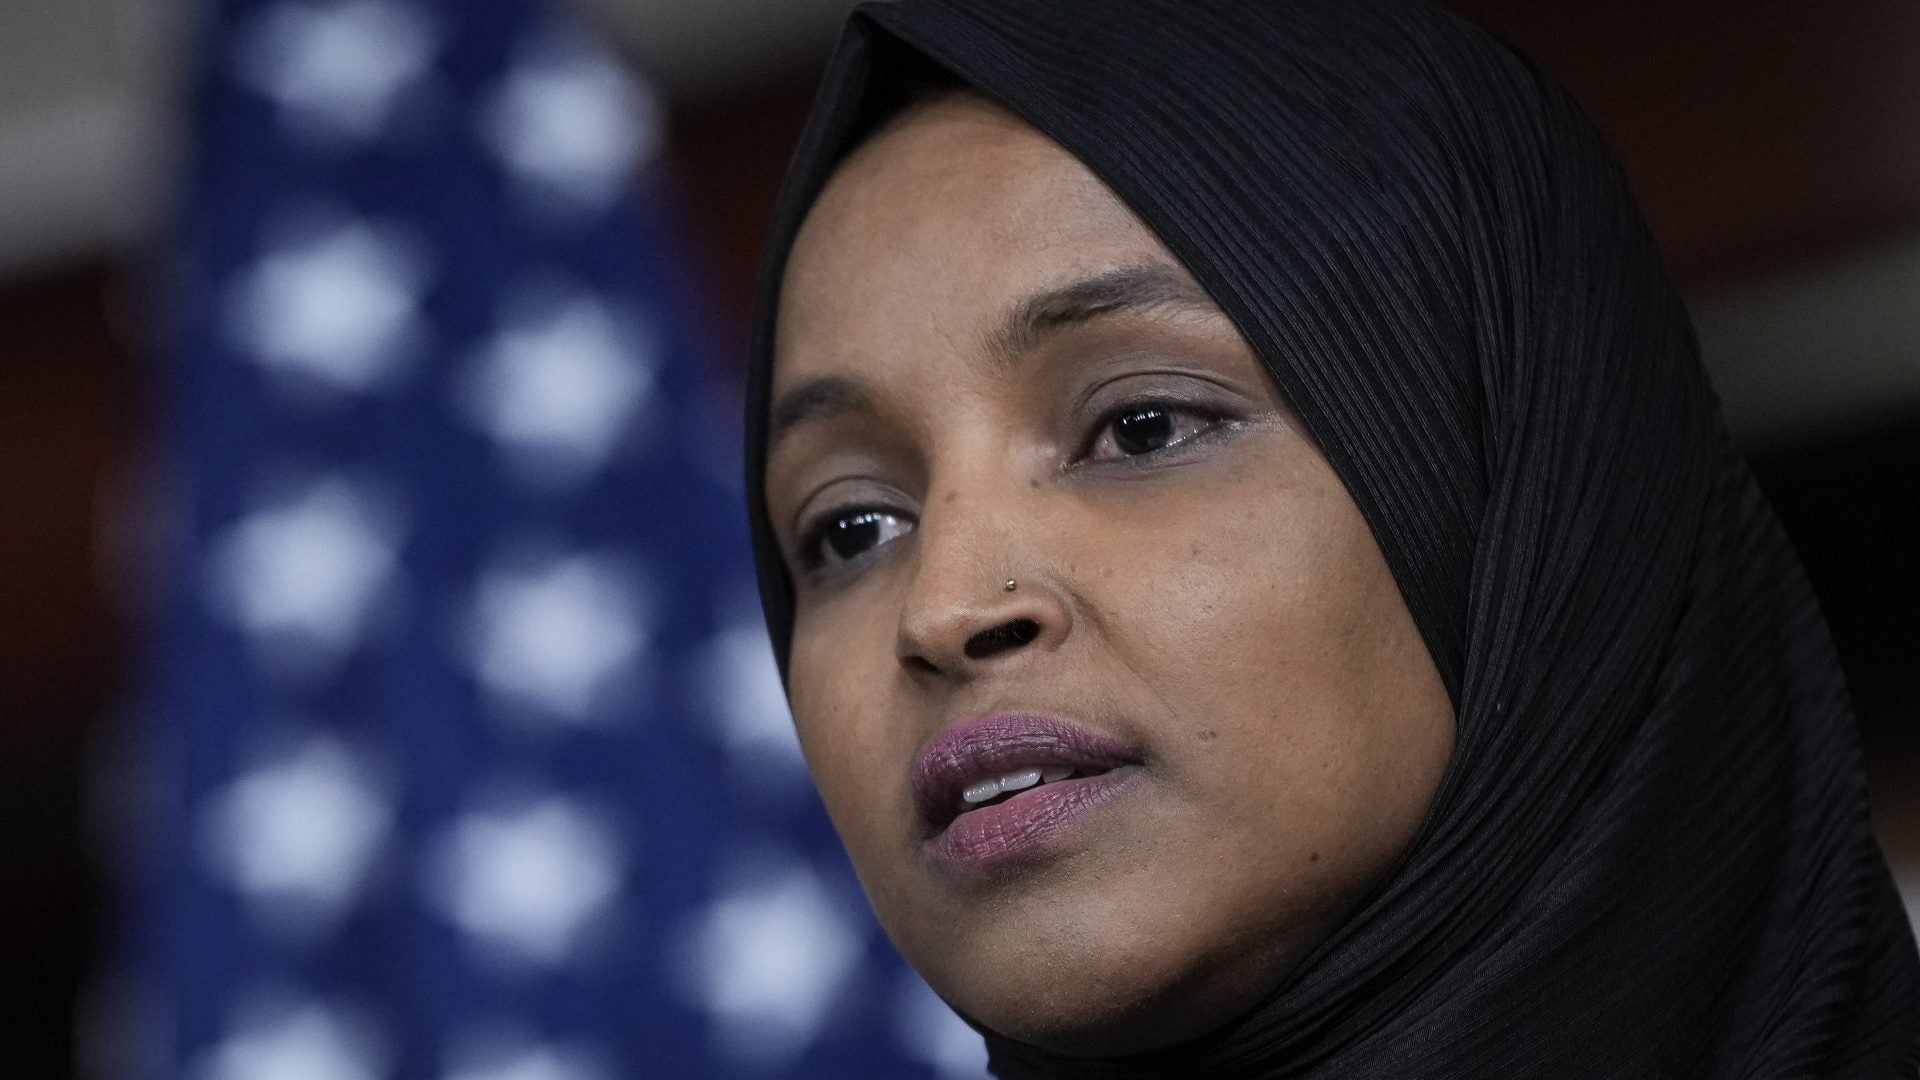 Rep. Ilhan Omar Expects House Leaders To Take "Decisive Action" Against Congresswoman Lauren Boebert For Anti-Muslim Remarks